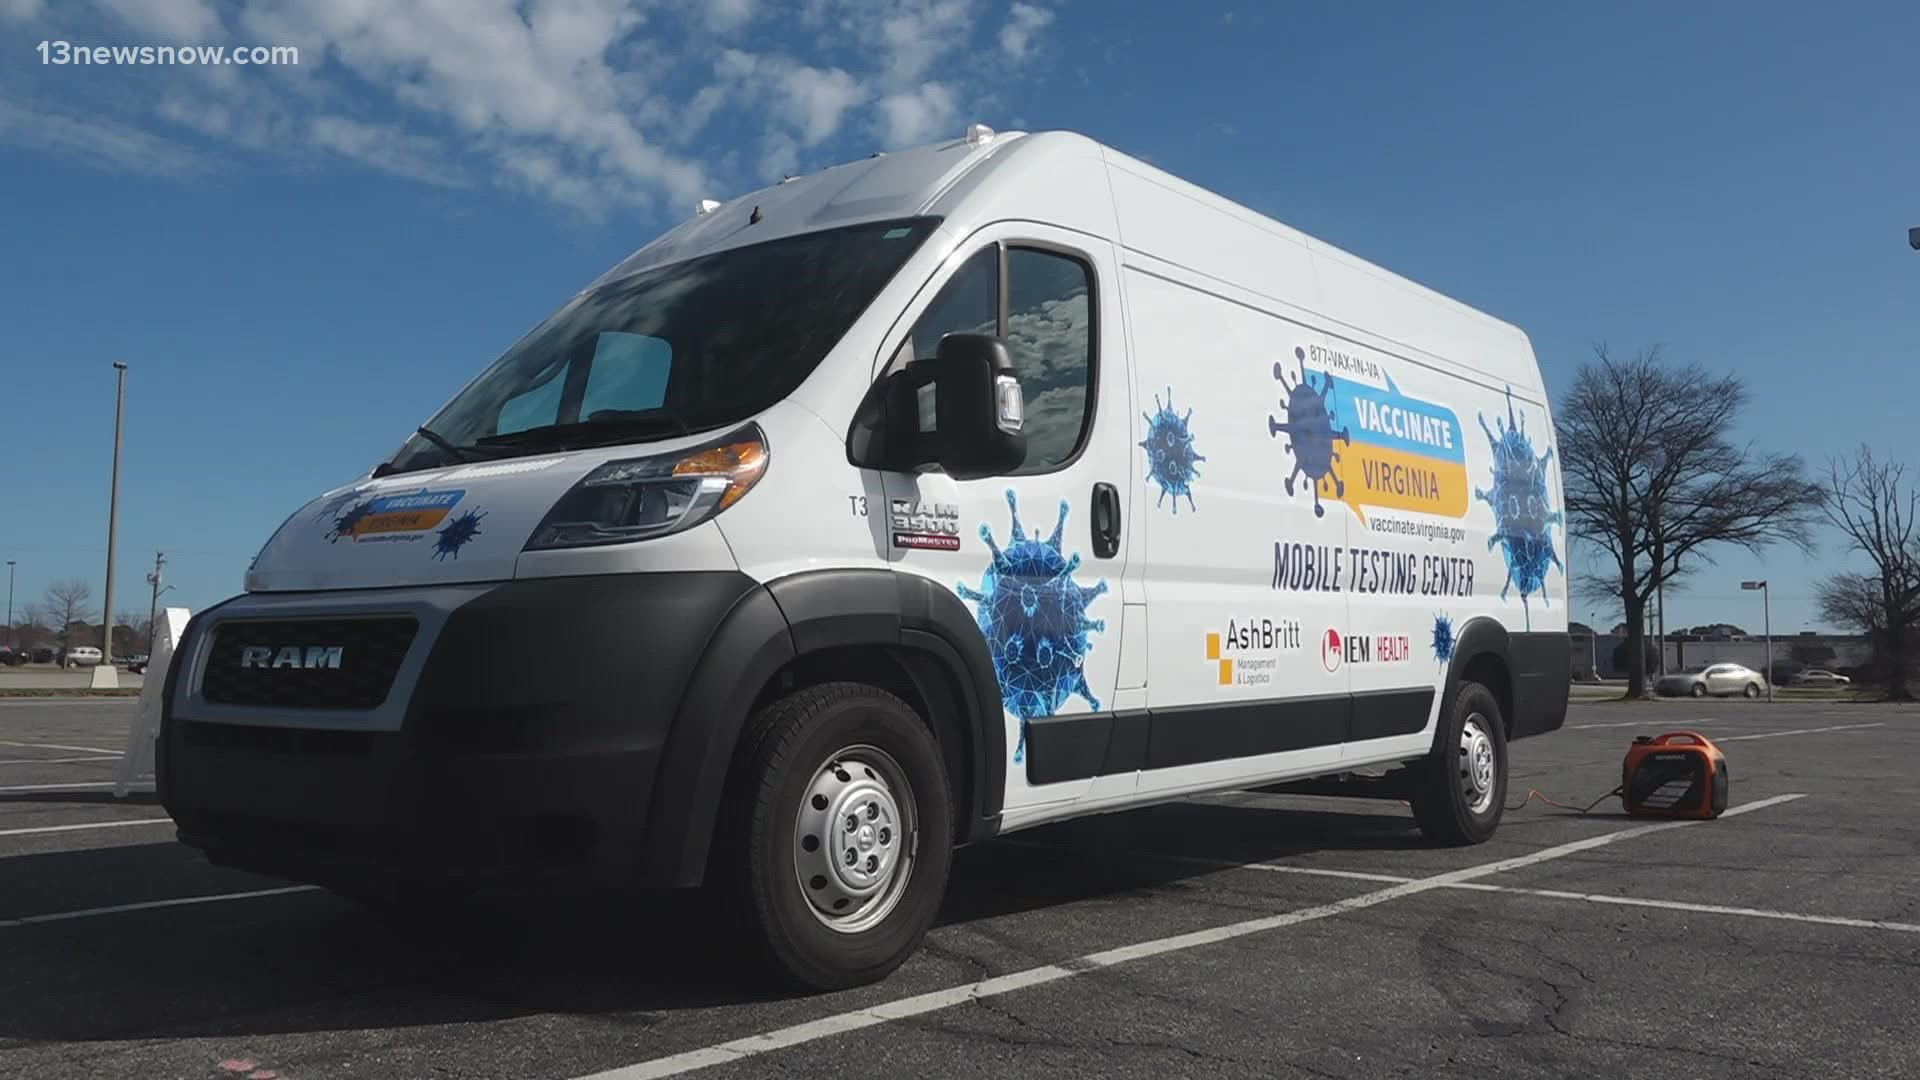 Virginia Department of Health leaders said they are stopping the mobile COVID-19 testing van due to the low demand of people needing a test.